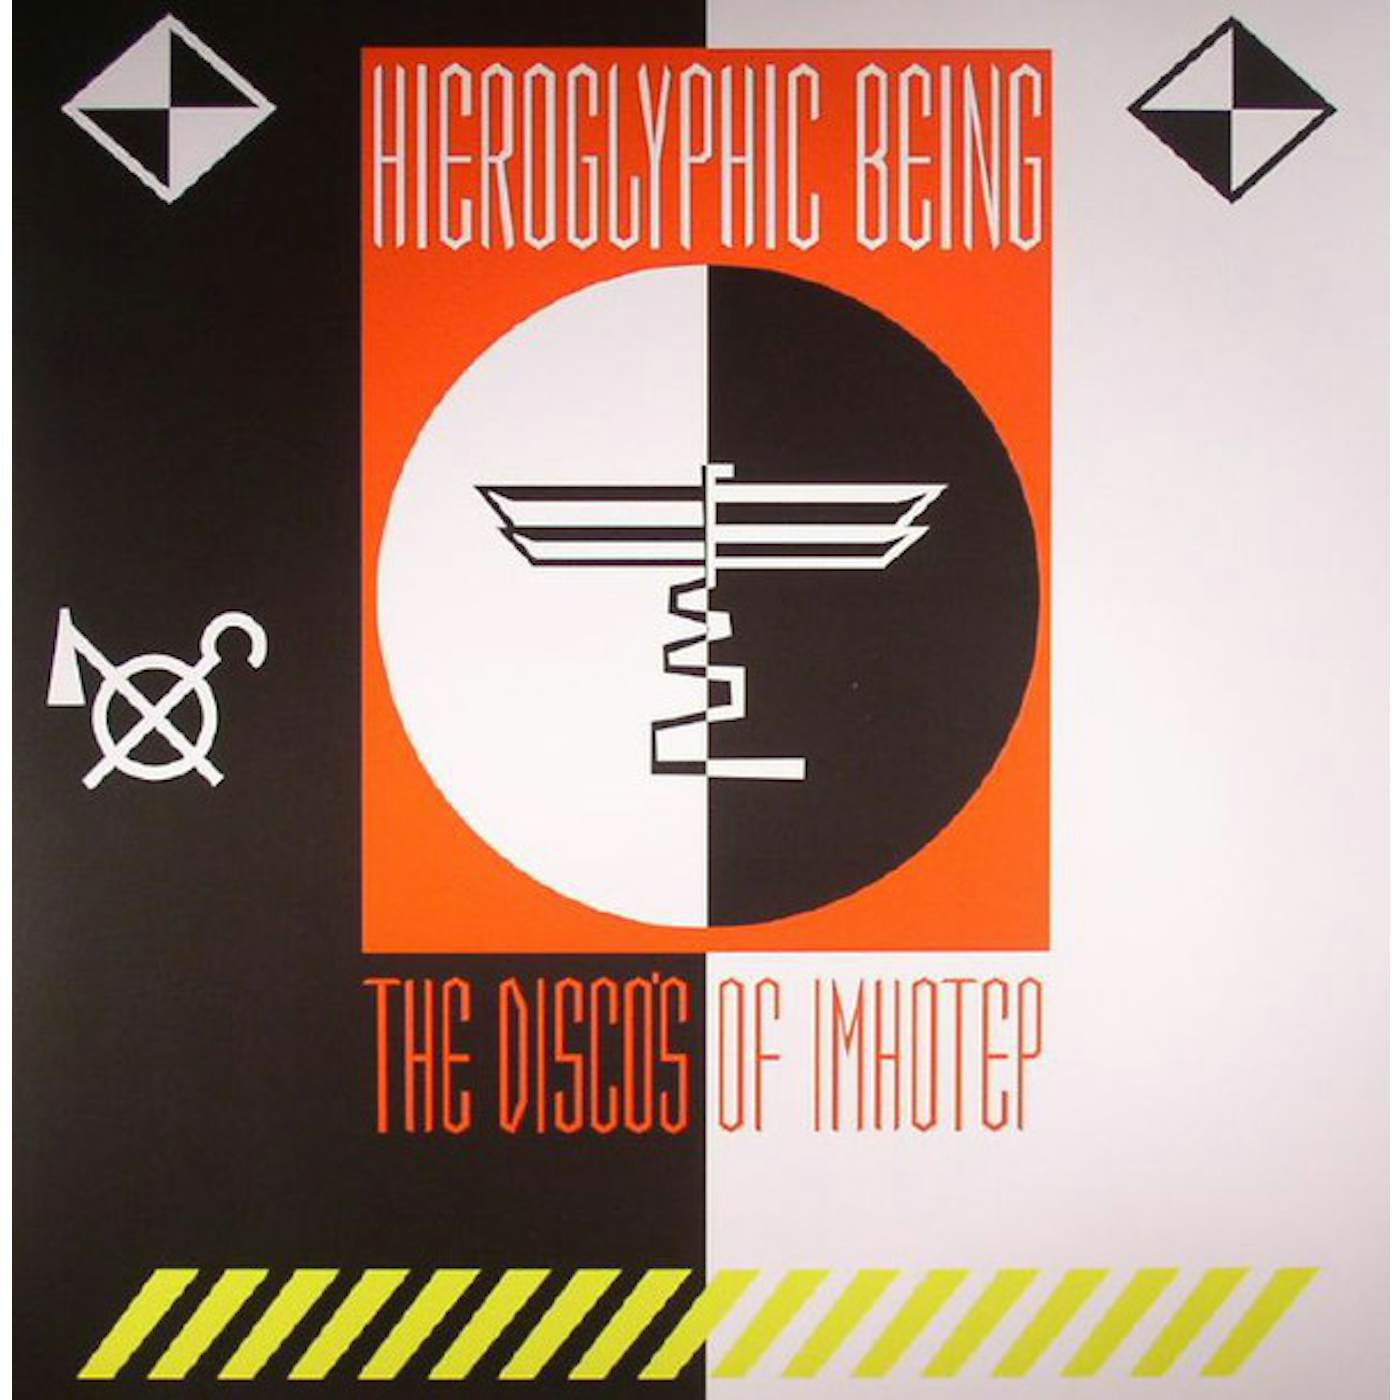 Hieroglyphic Being The Disco's Of Imhotep Vinyl Record